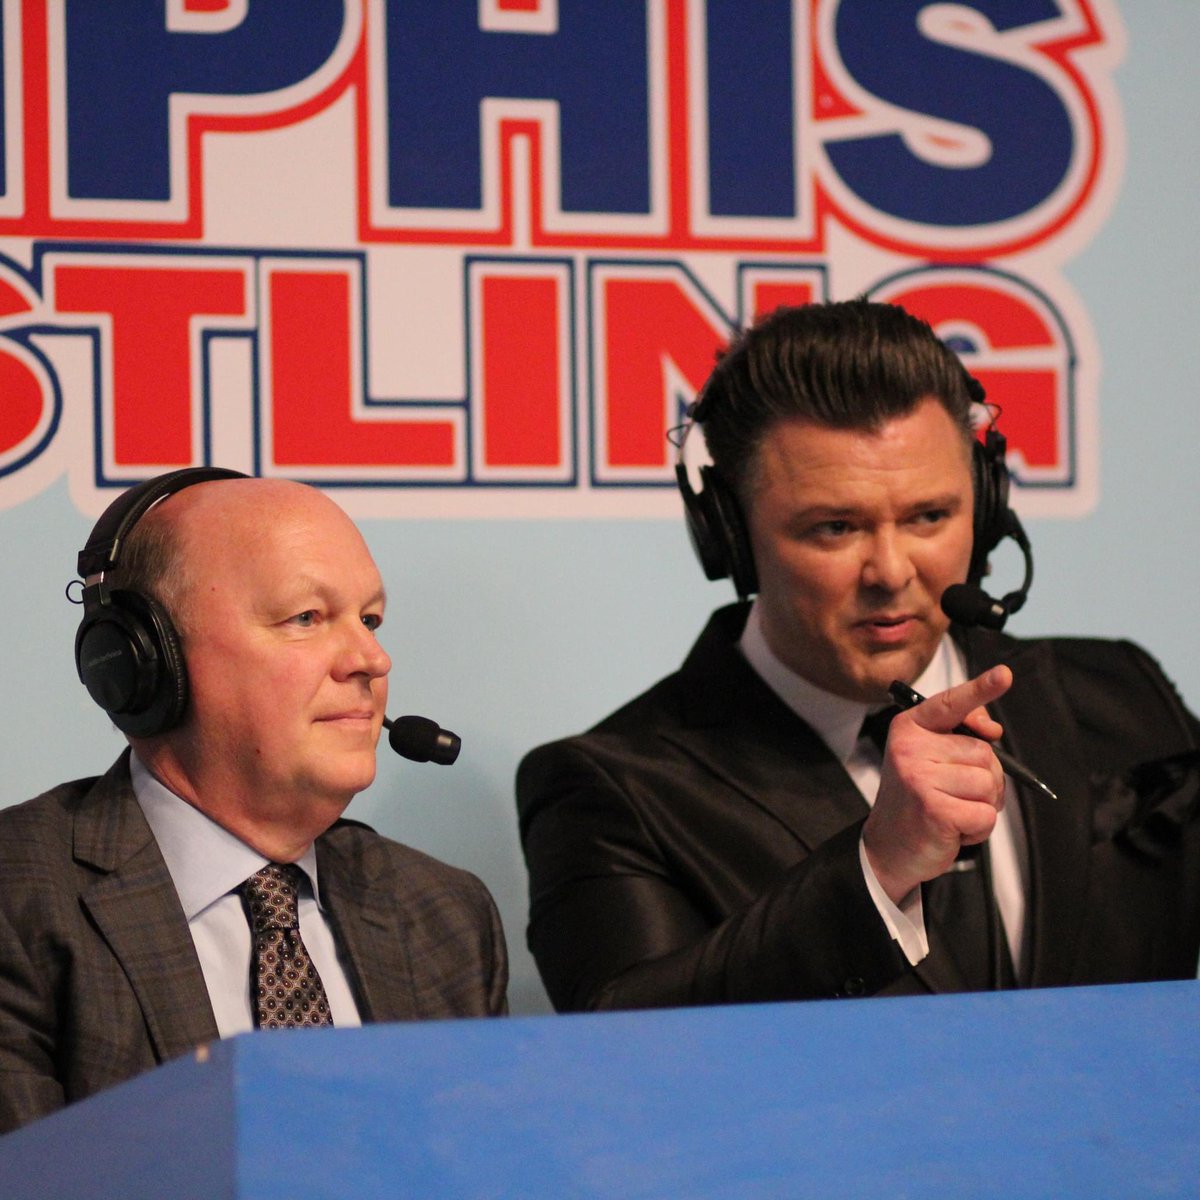 . @PetePranica will join @DustinStarr at the desk this weekend on #MemphisWrestling!